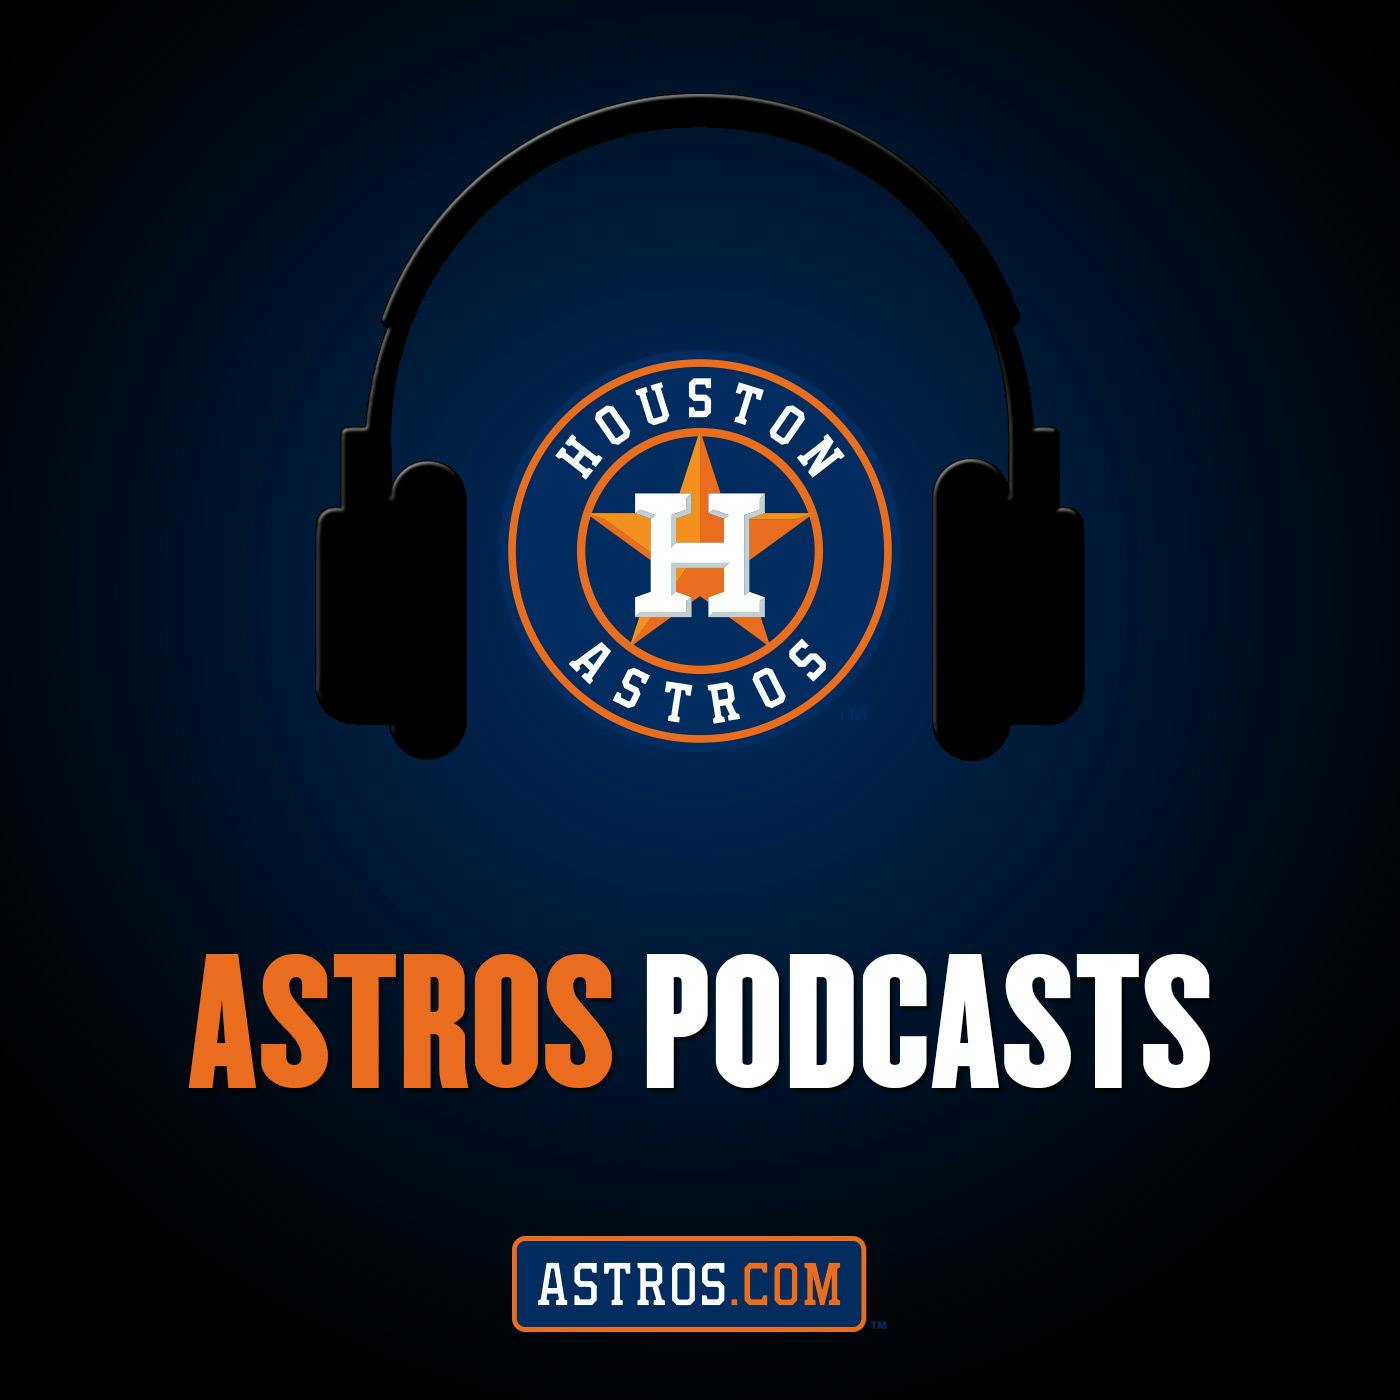 12/10 Astroline Hot Stove Podcast by Karbach Brewing: Manager Dusty Baker, Geoff Blum, and Kevin Eshenfelder